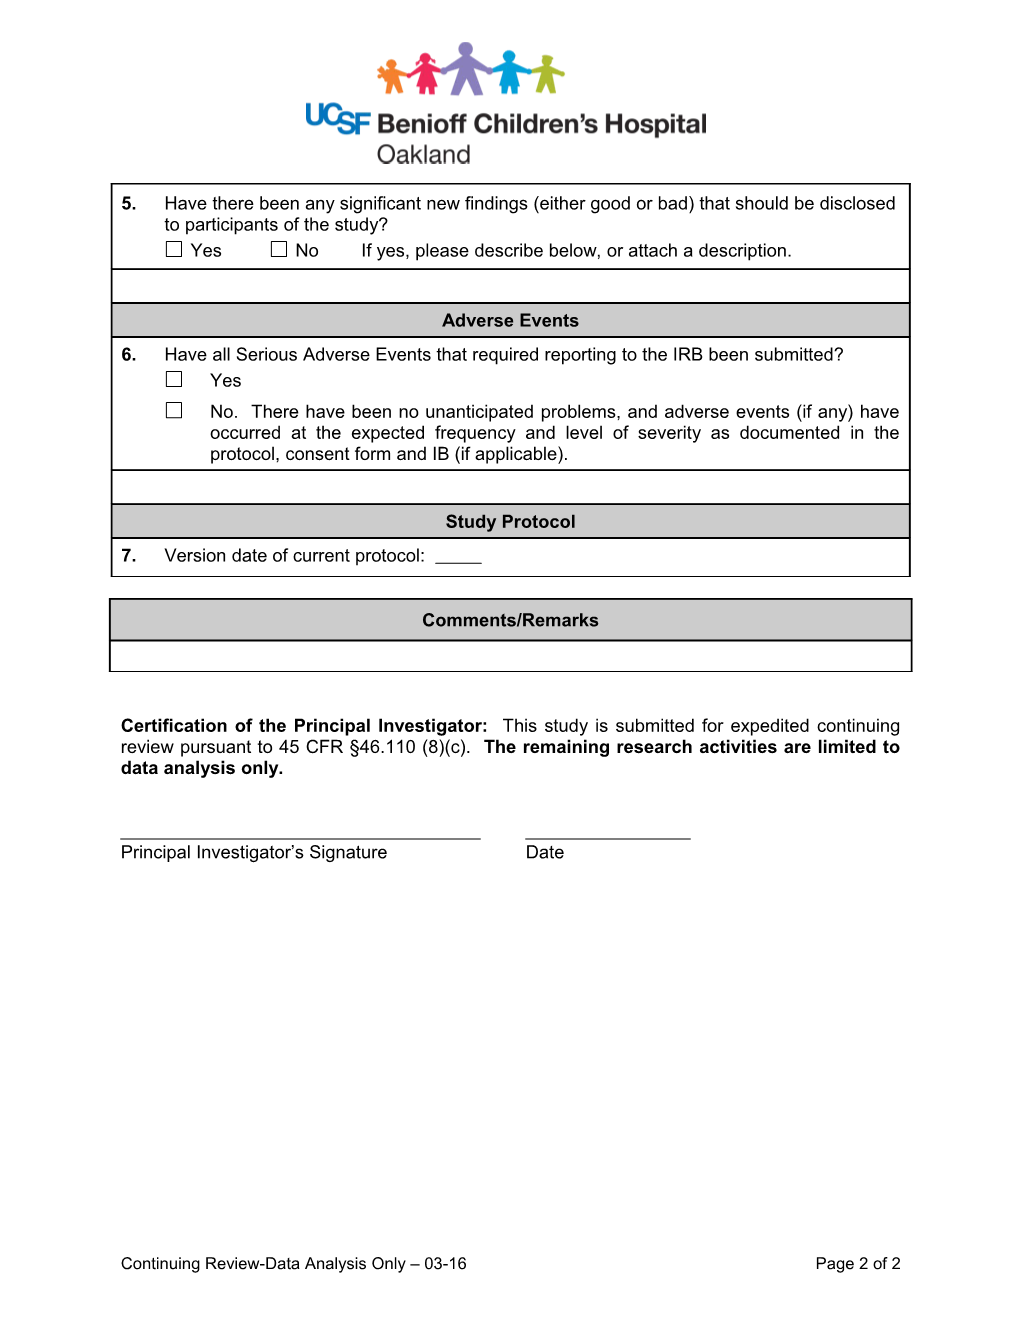 Application for Continuing Review